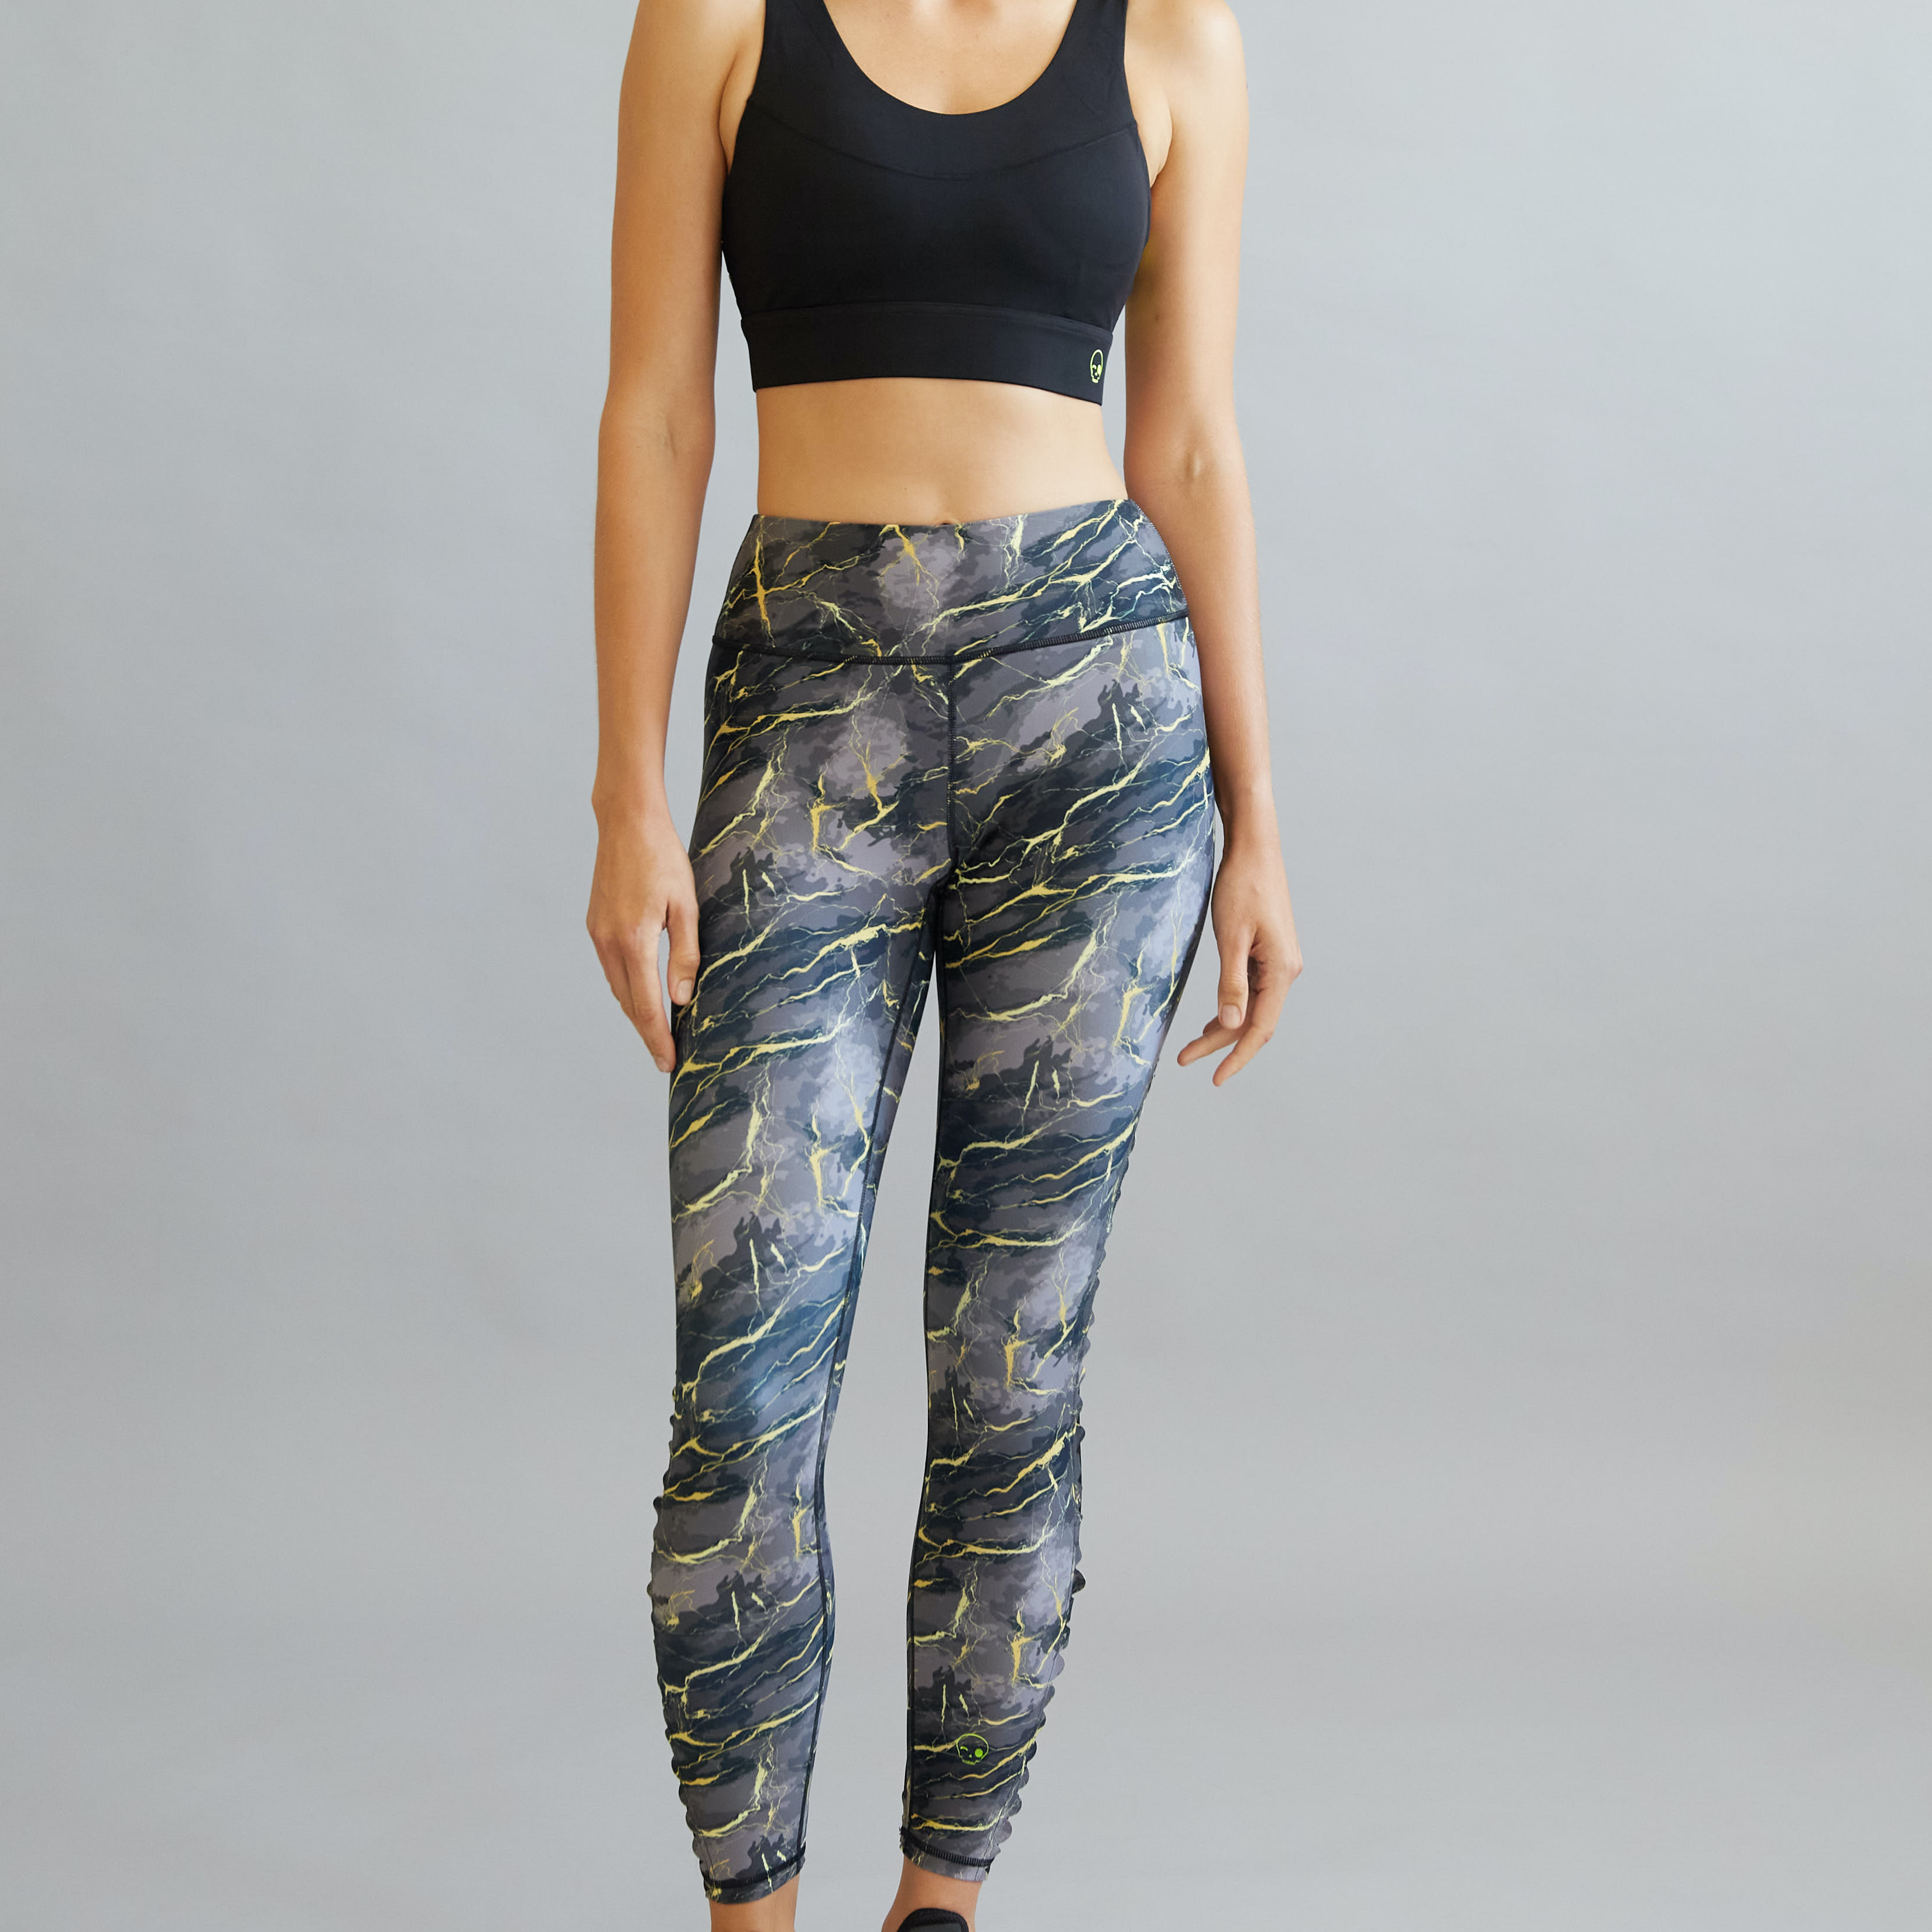 high-waisted workout leggings